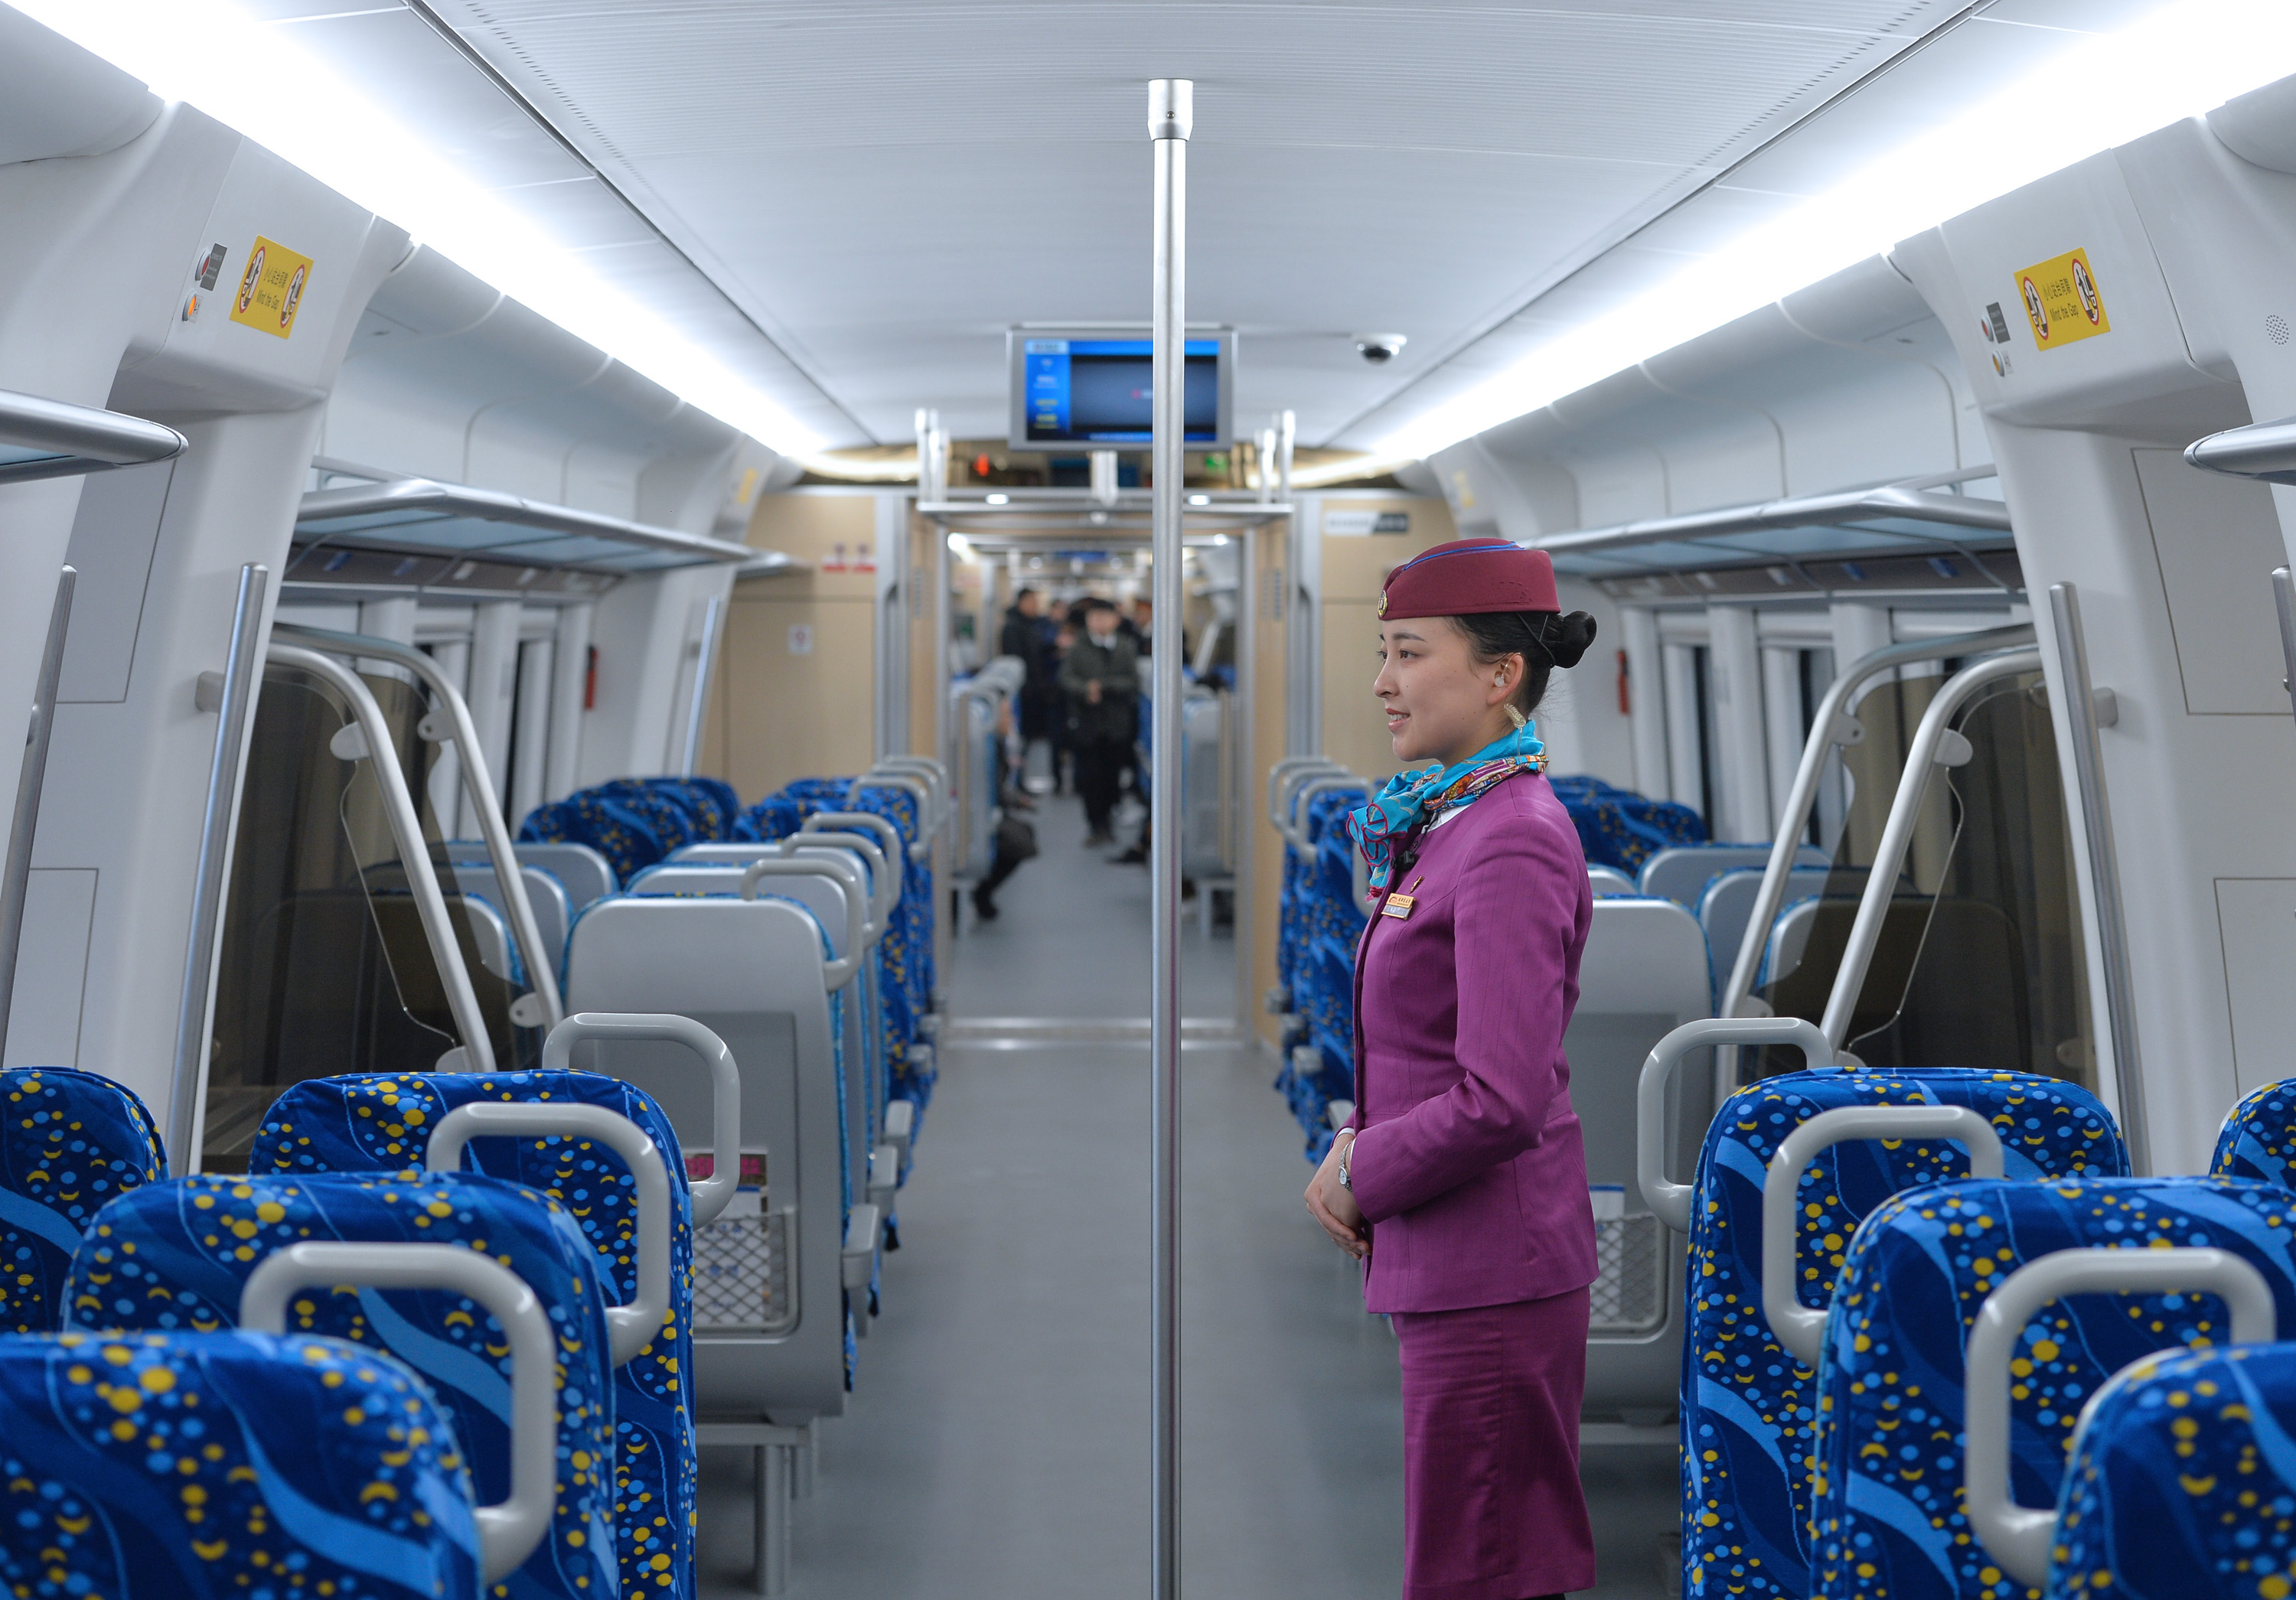 This photo taken on Tuesday, December 29, 2018 shows the inside of the "Tianfu" bullet train. [Photo: IC]